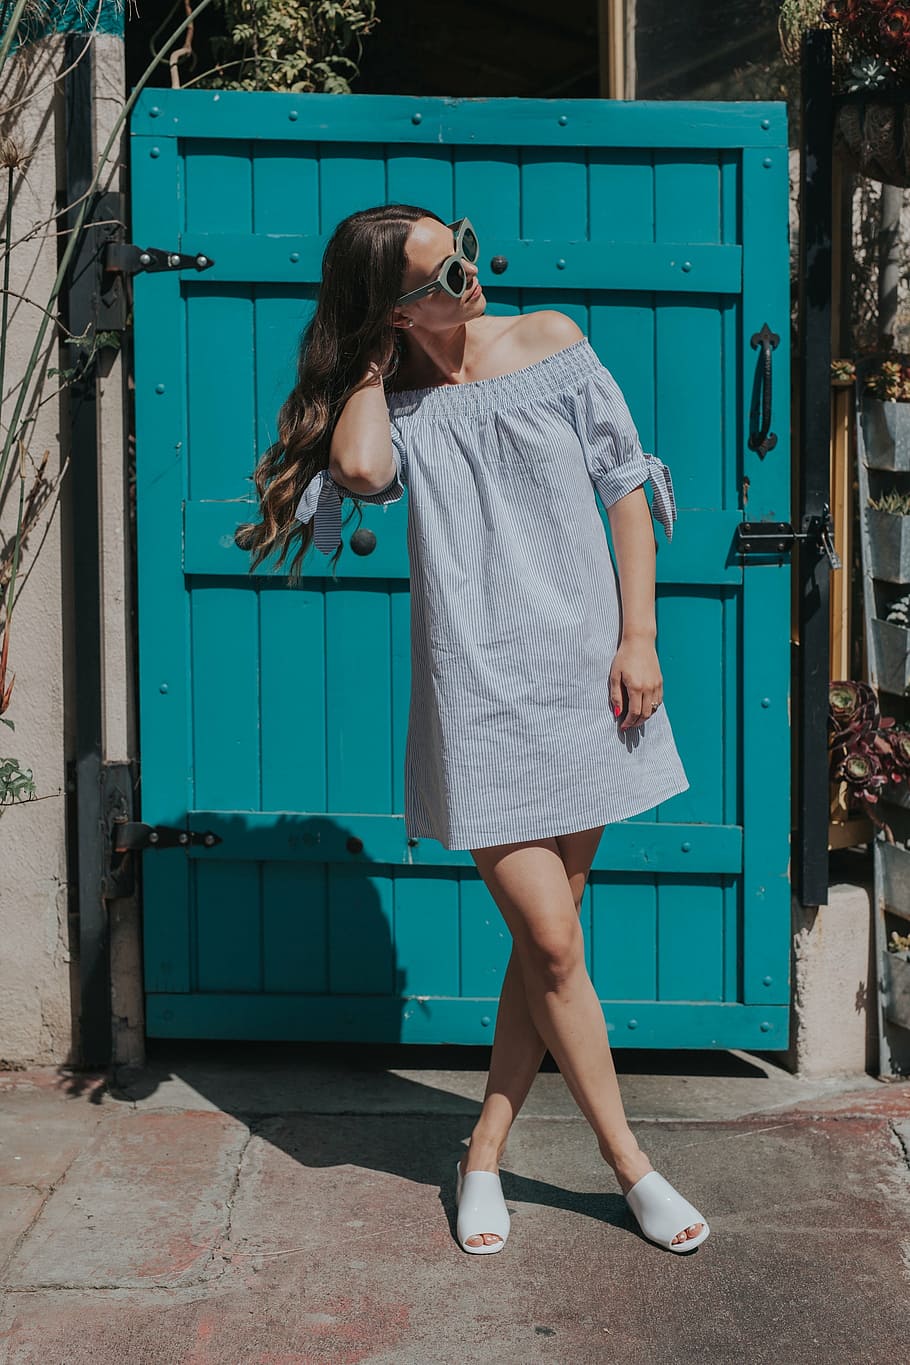 woman, standing, blue, wooden, door, people, girl, alone, fashion, clothing